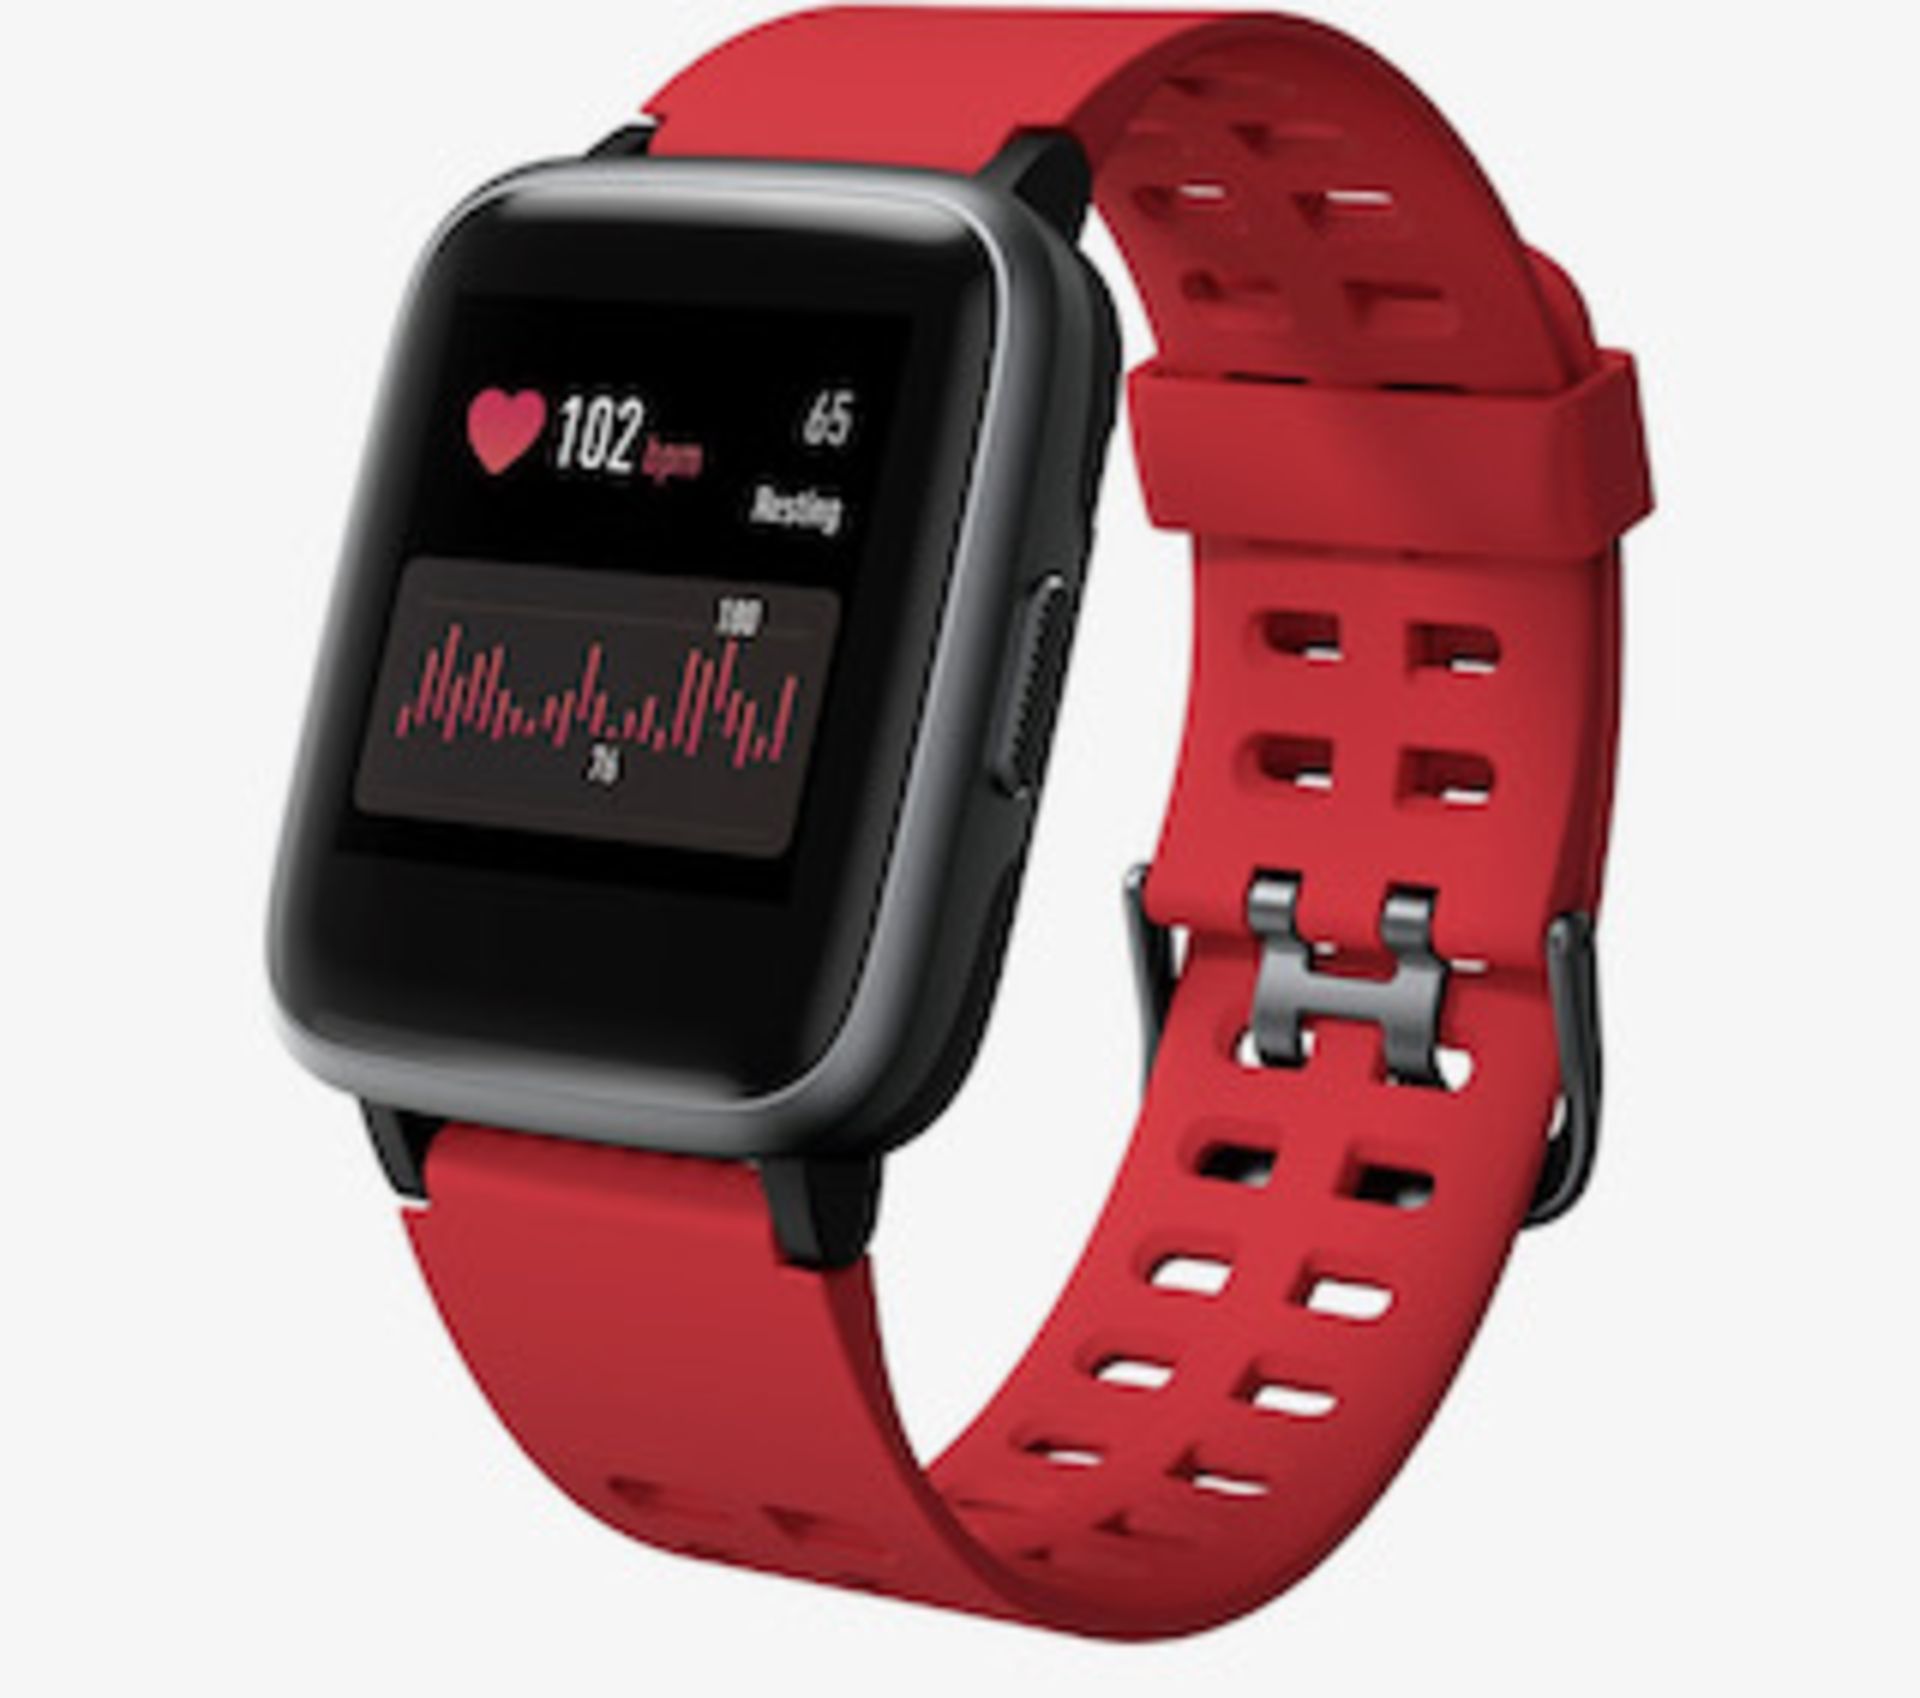 Brand New Unisex Fitness Tracker Watch Id205 Red Strap About This Item 1.3-Inch LCD Colour - Image 5 of 34